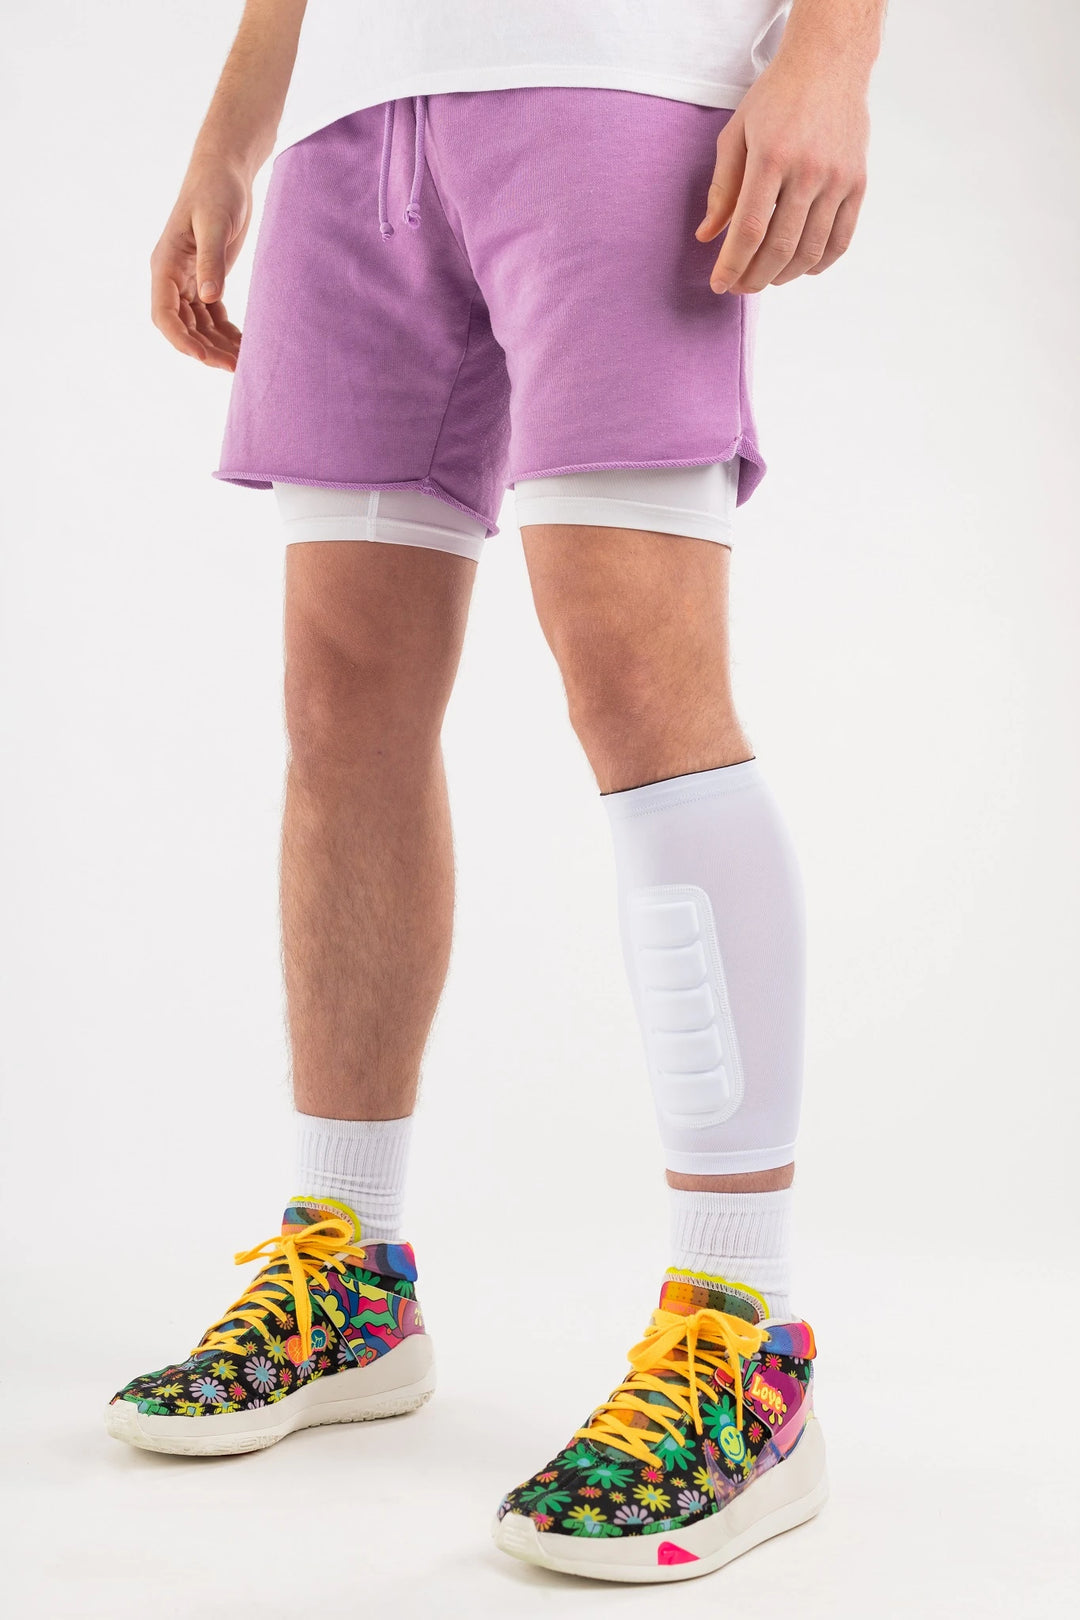 PERFORMANCE CALF SLEEVE (PAIR) – Court Candy